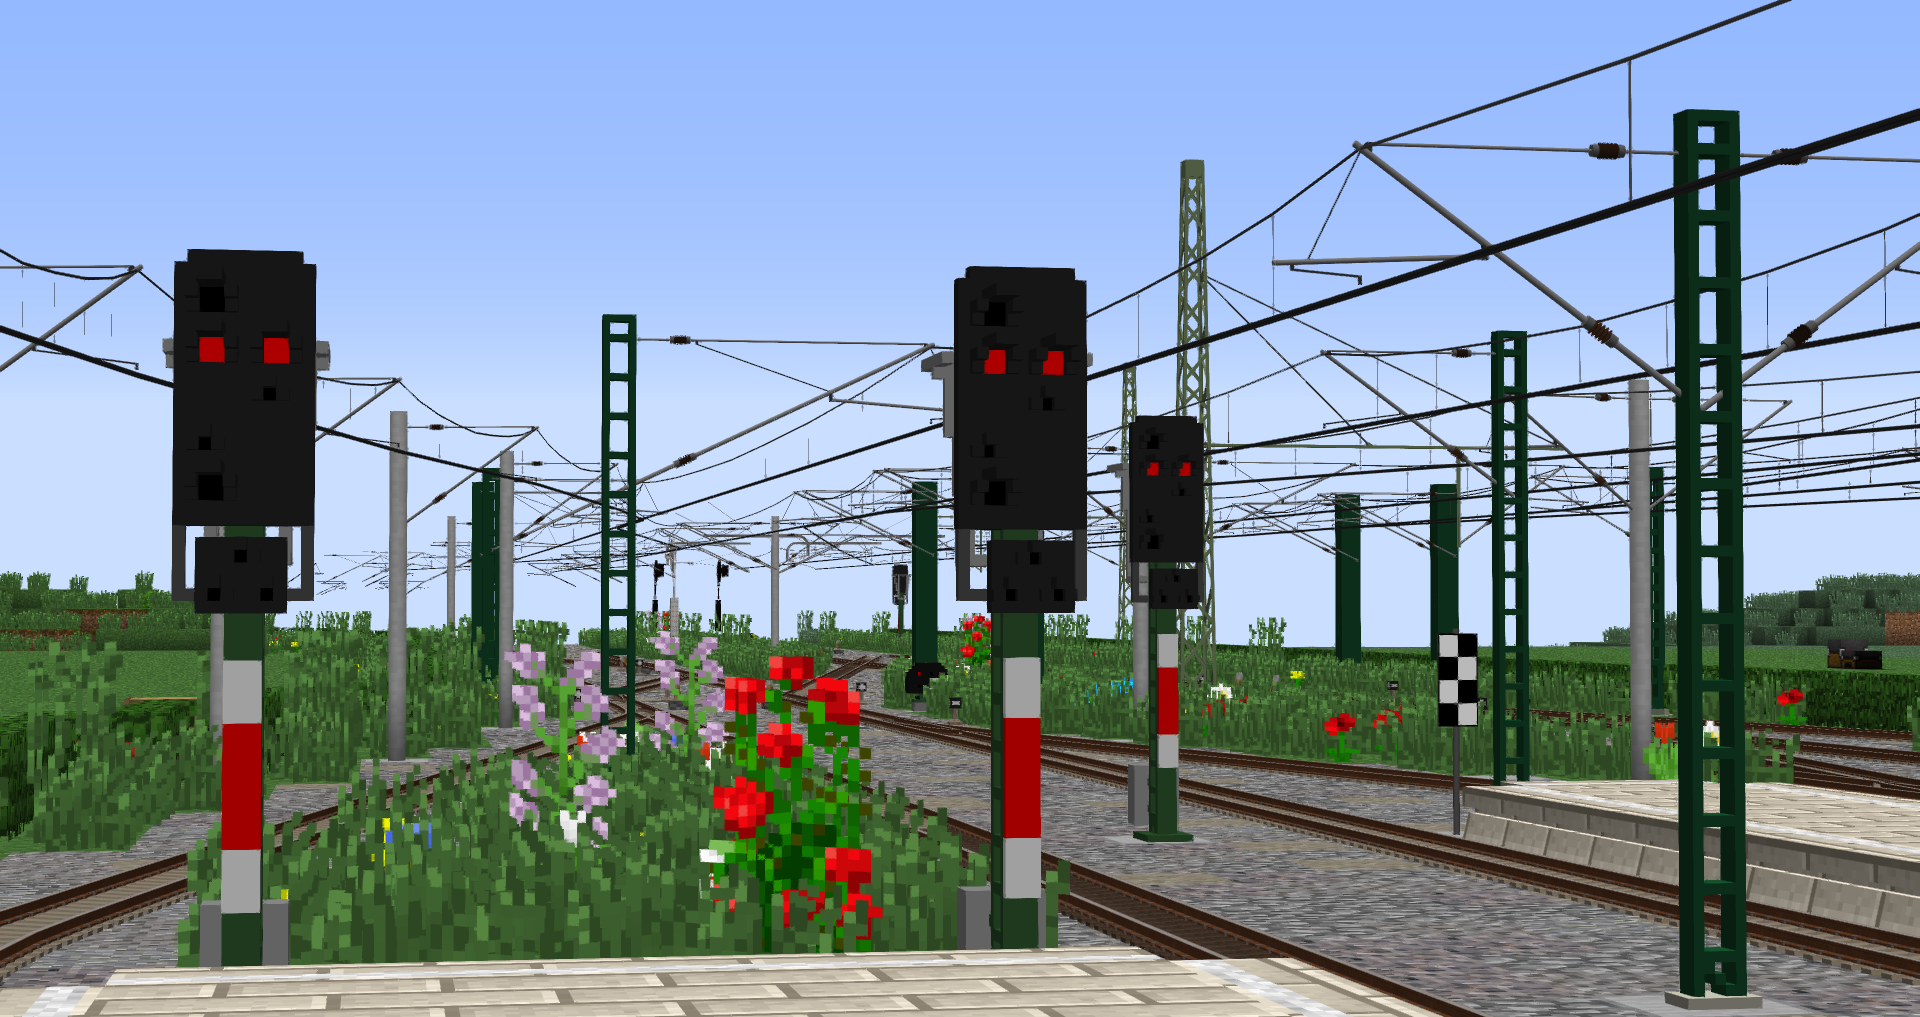 Large station with signals